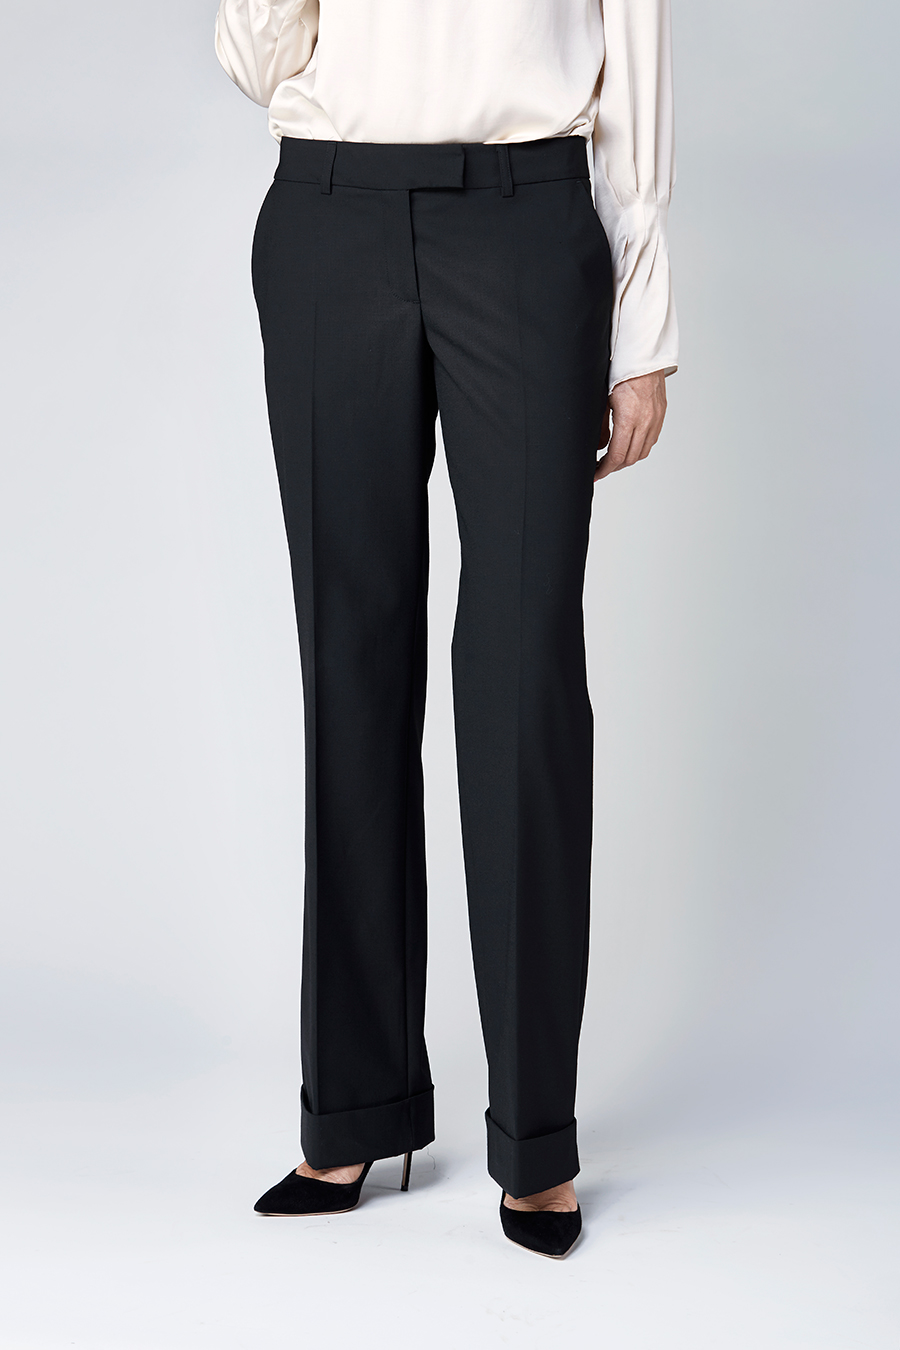 Black mid-rise wide leg pants with cuff | D2line